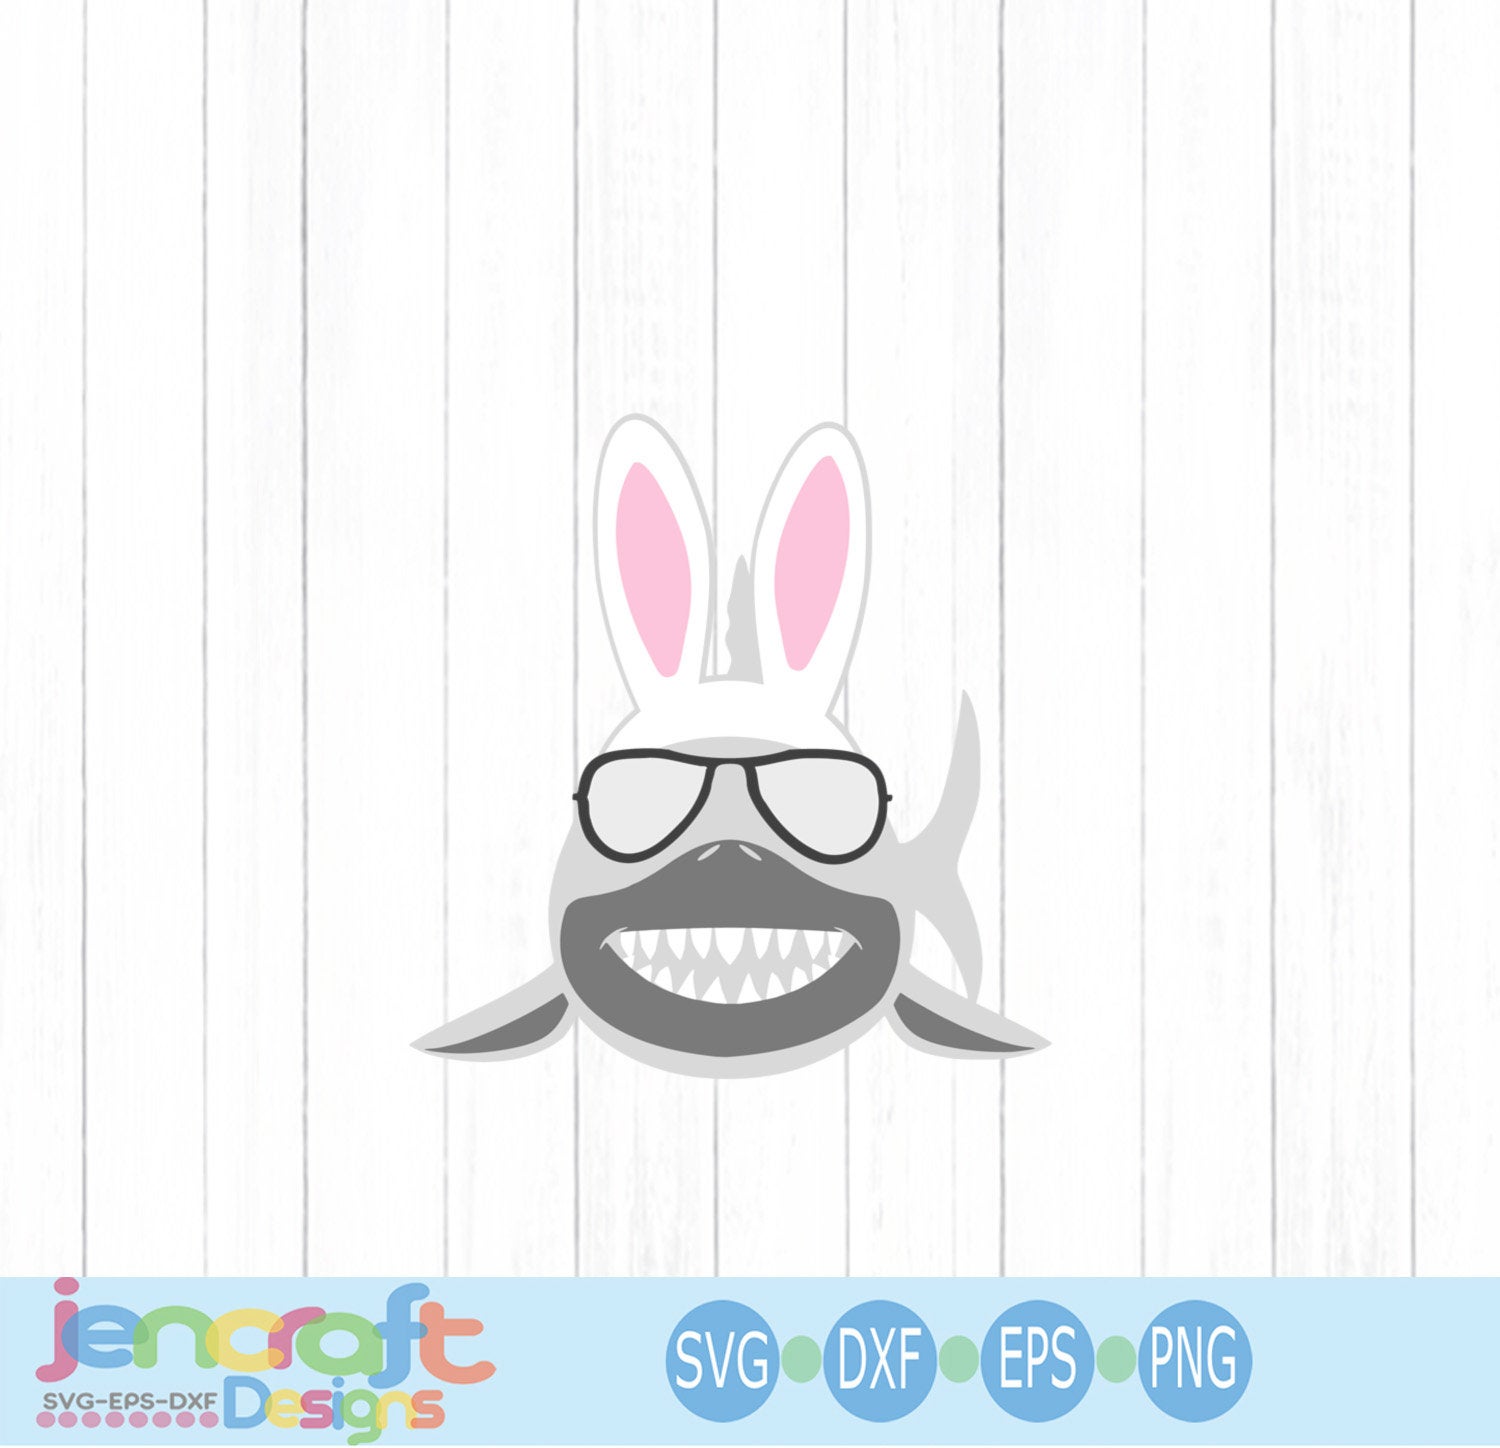 Easter Shark SVG, EPS, DXF and PNG - JenCraft Designs